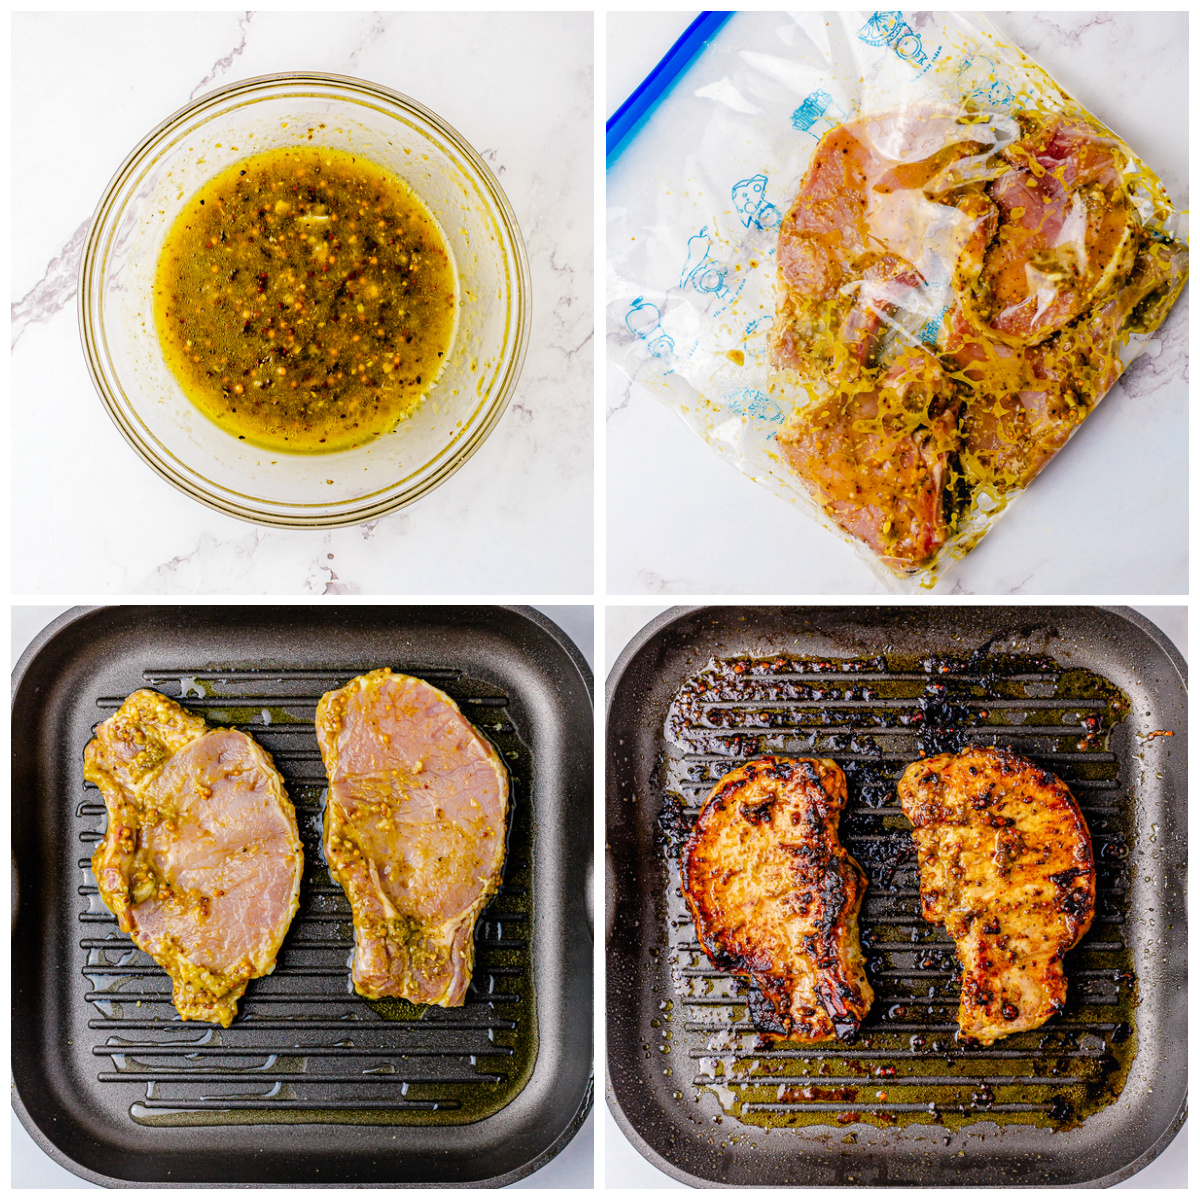 Step by step photos on how to make a Grilled Pork Chop Recipe